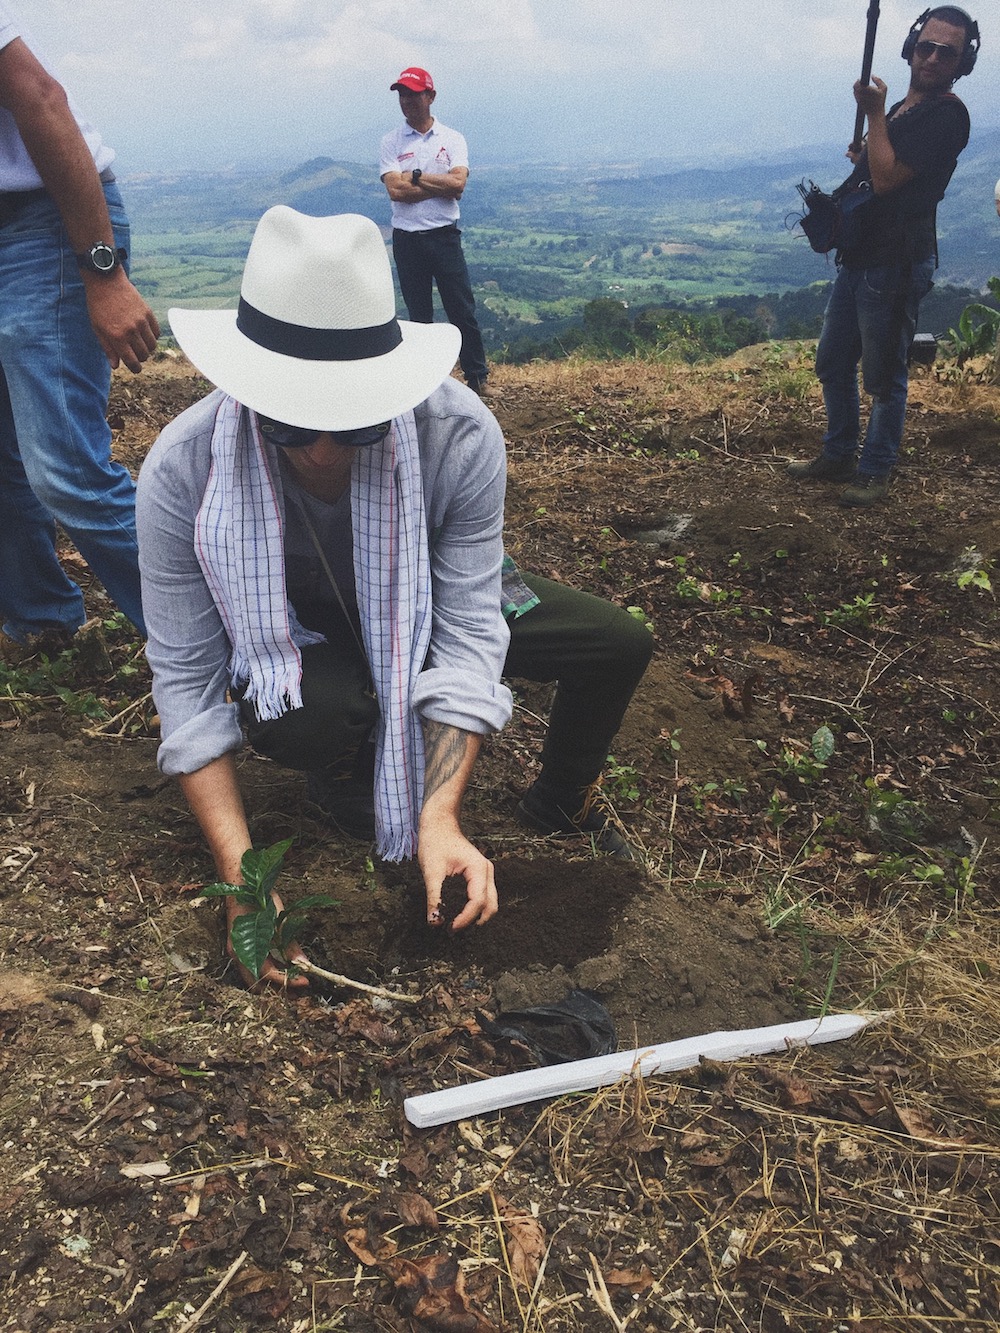 Planting a coffee tree in Colombia